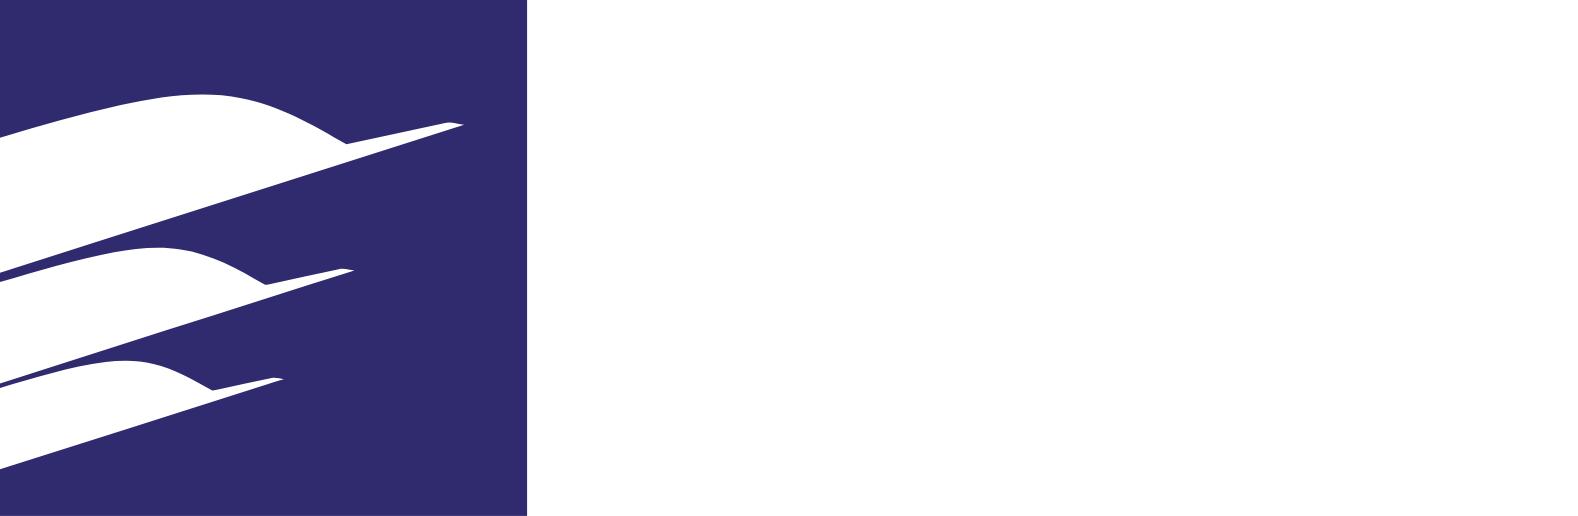 ALAFCO Aviation Lease and Finance Company logo large for dark backgrounds (transparent PNG)